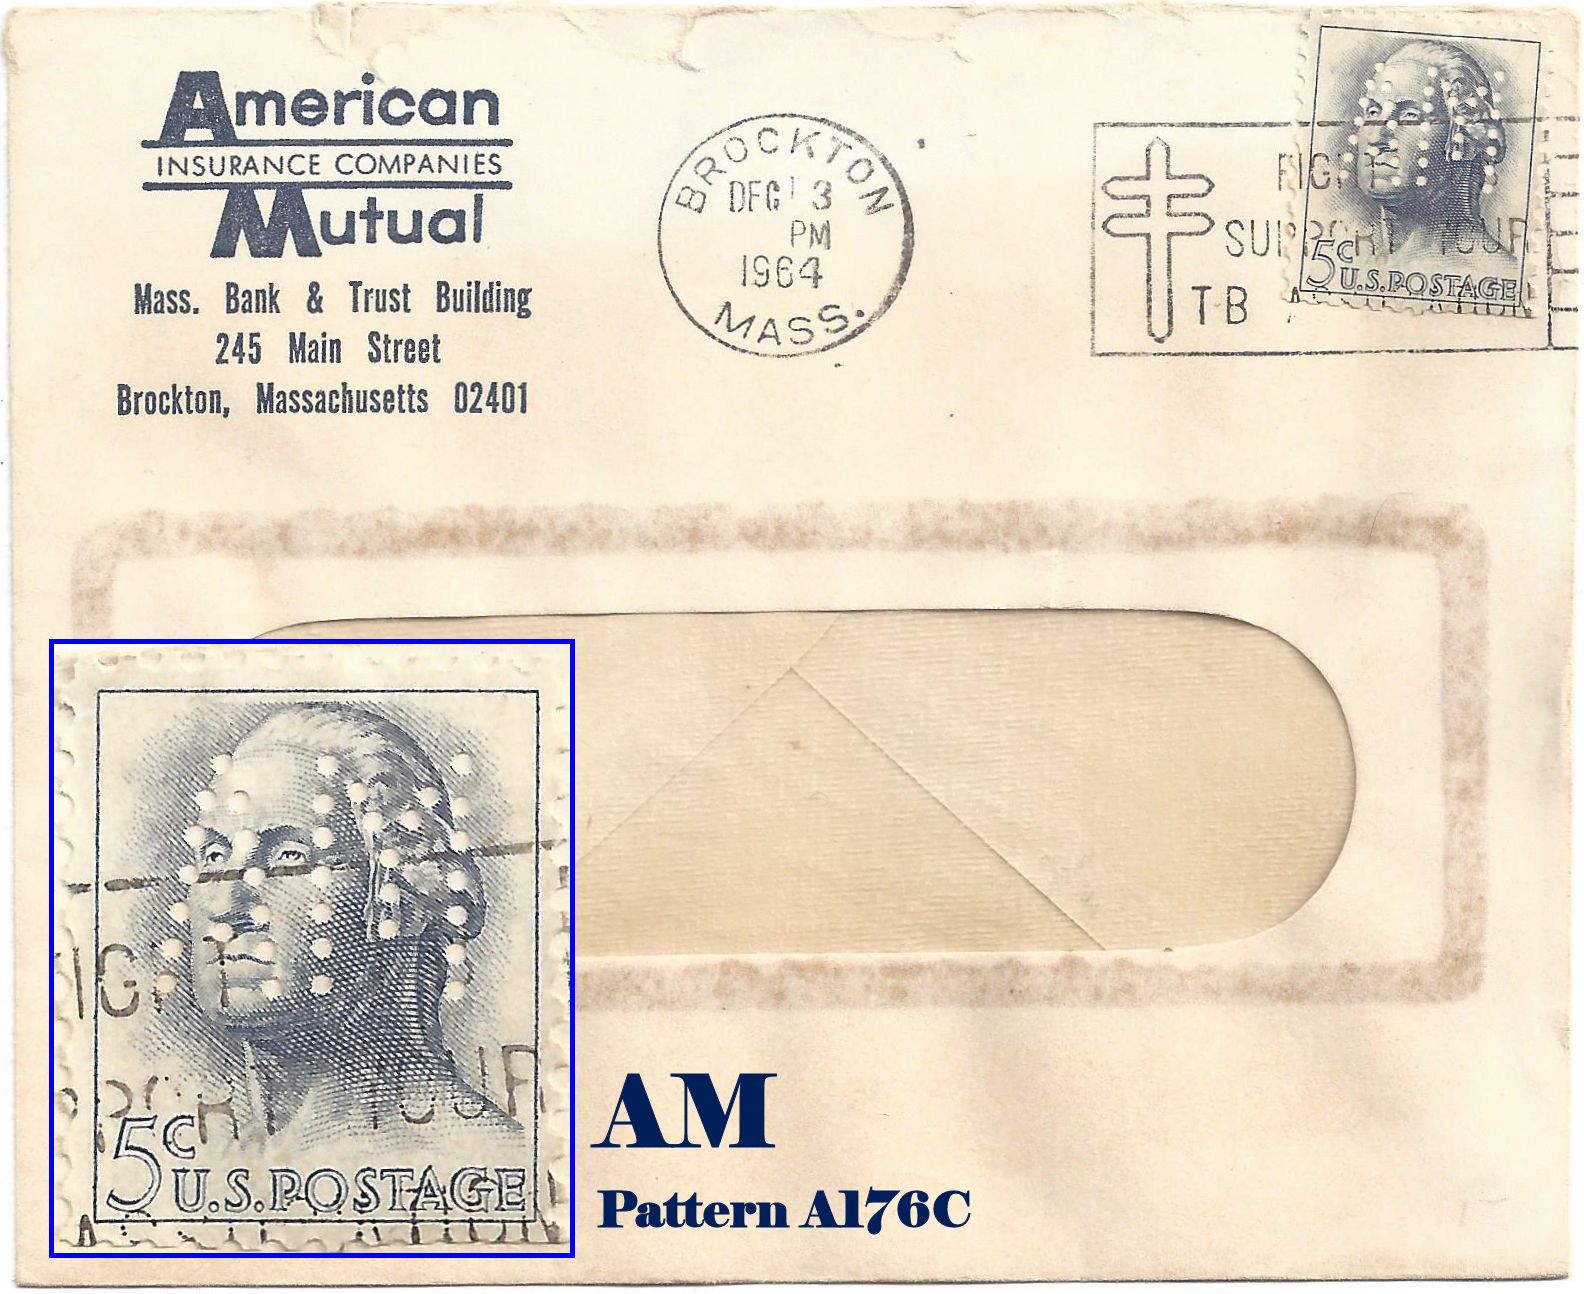 U.S. Perfin Covers "A" Patterns